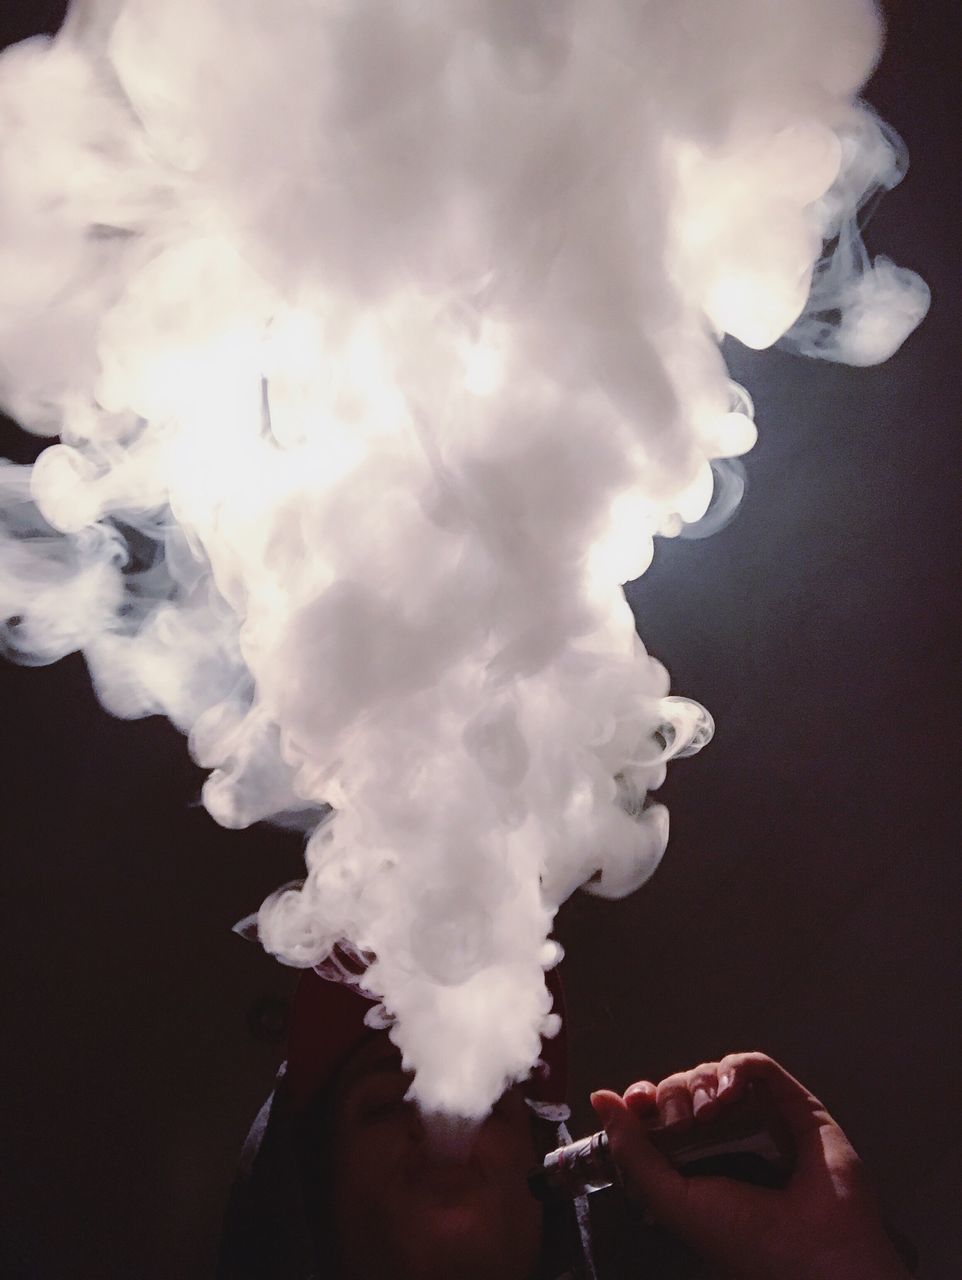 smoke - physical structure, cloud - sky, low angle view, sky, emitting, no people, outdoors, nature, day, close-up, representing